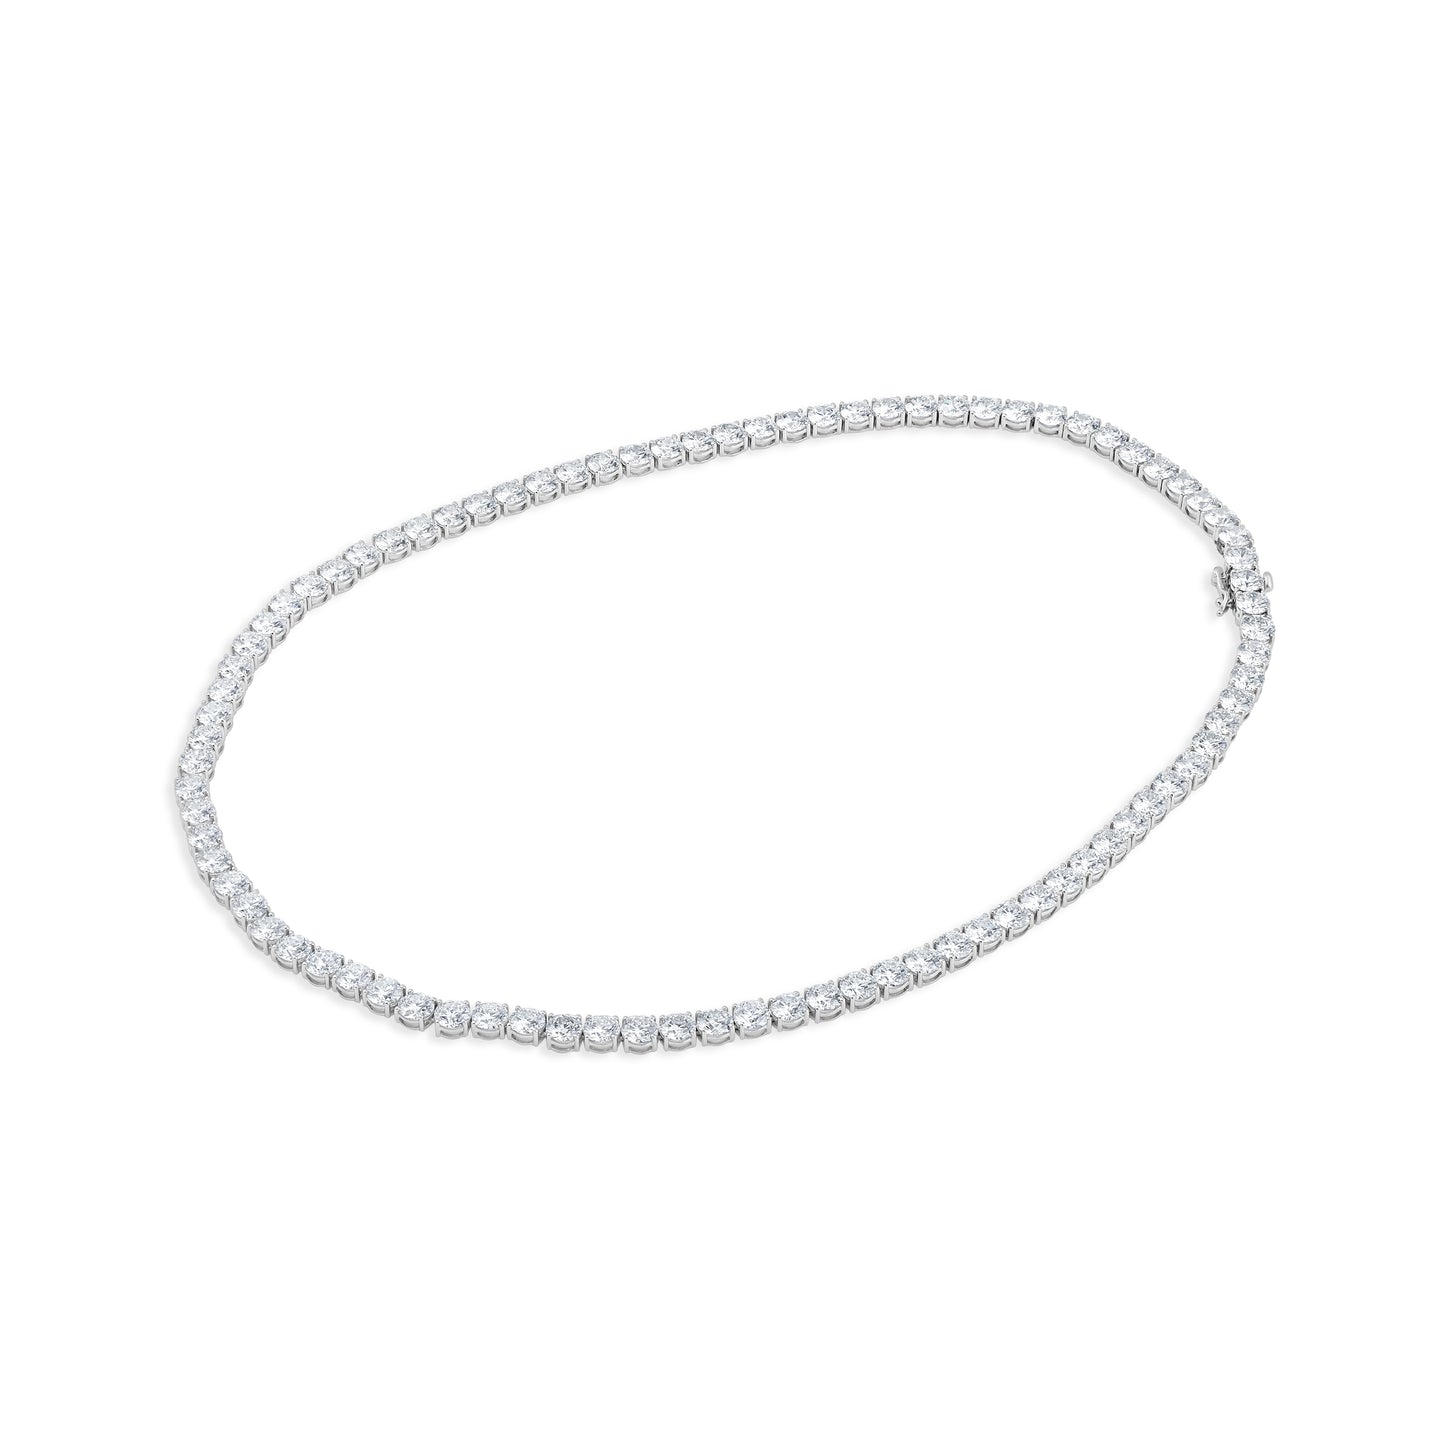 Dazzling Circlet: Embrace Timeless Elegance with our Round-Cut Diamond Necklace!